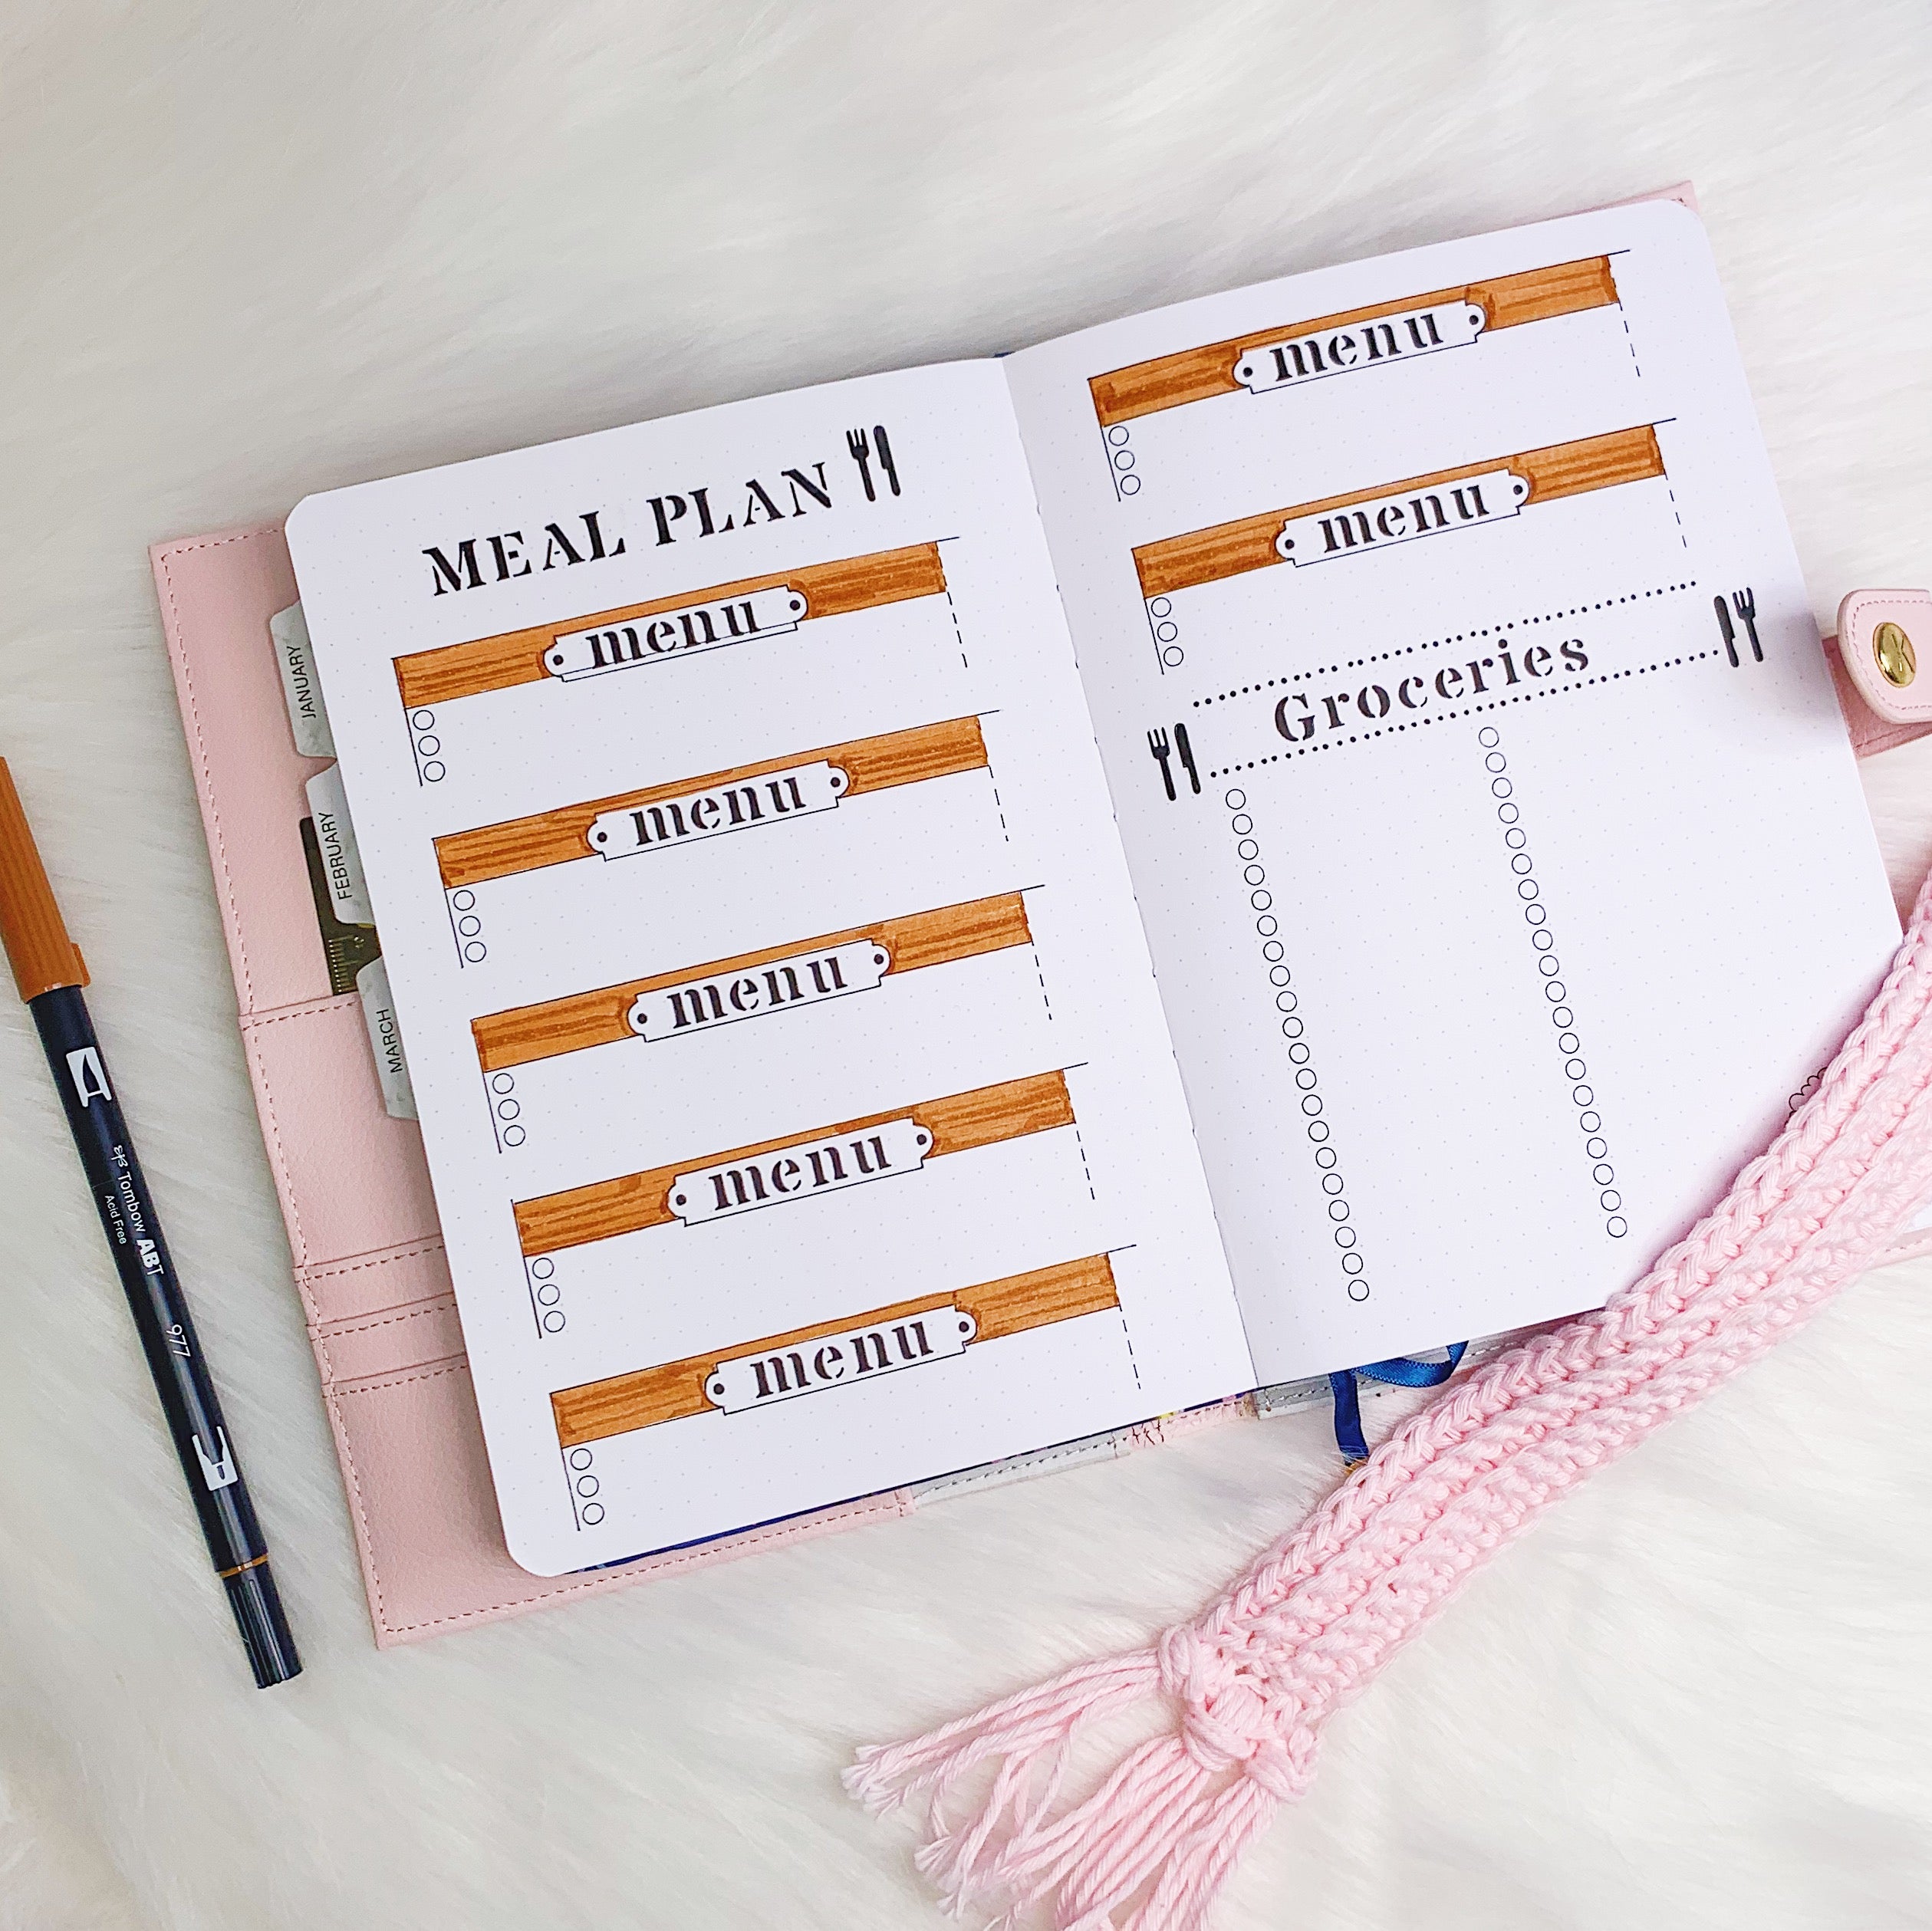 Bullet Journal Stencils {They'll save you a ton of time!}